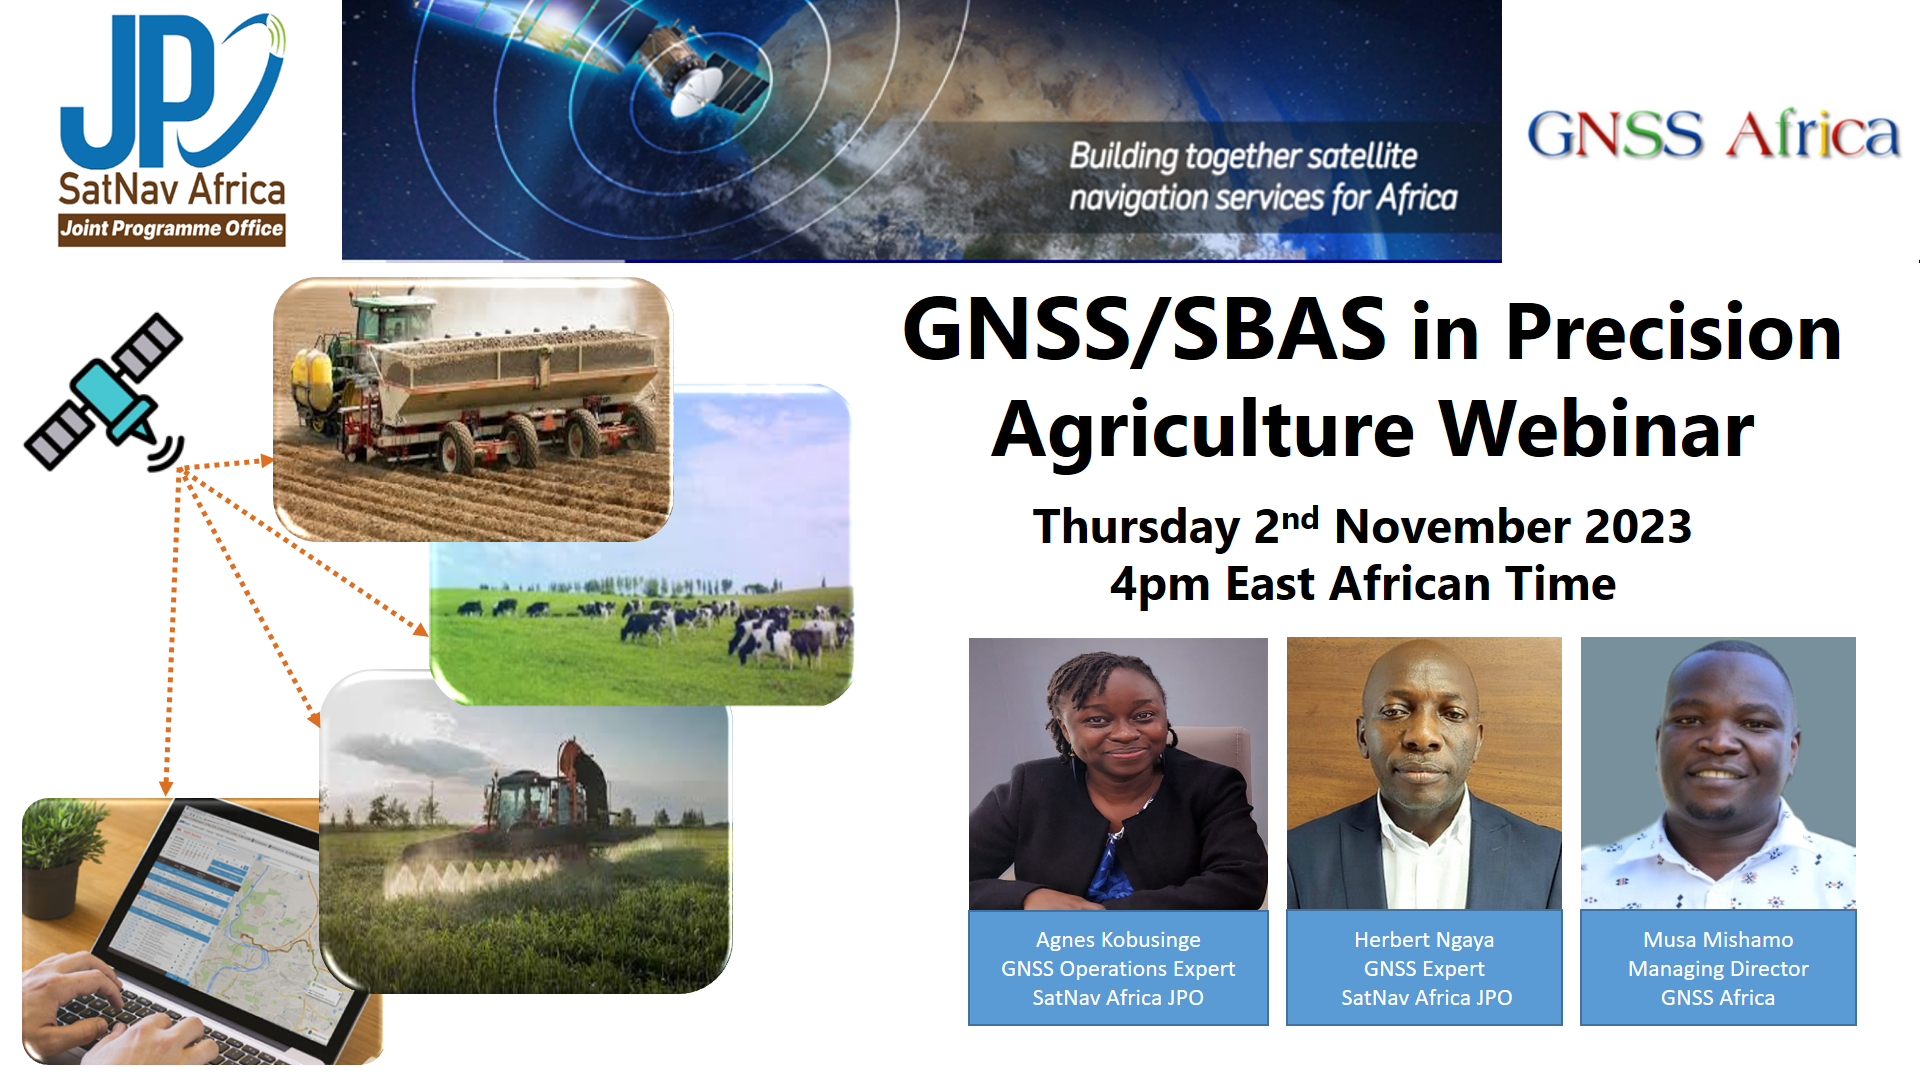 Webinar on GNSS/SBAS for Precision Agriculture